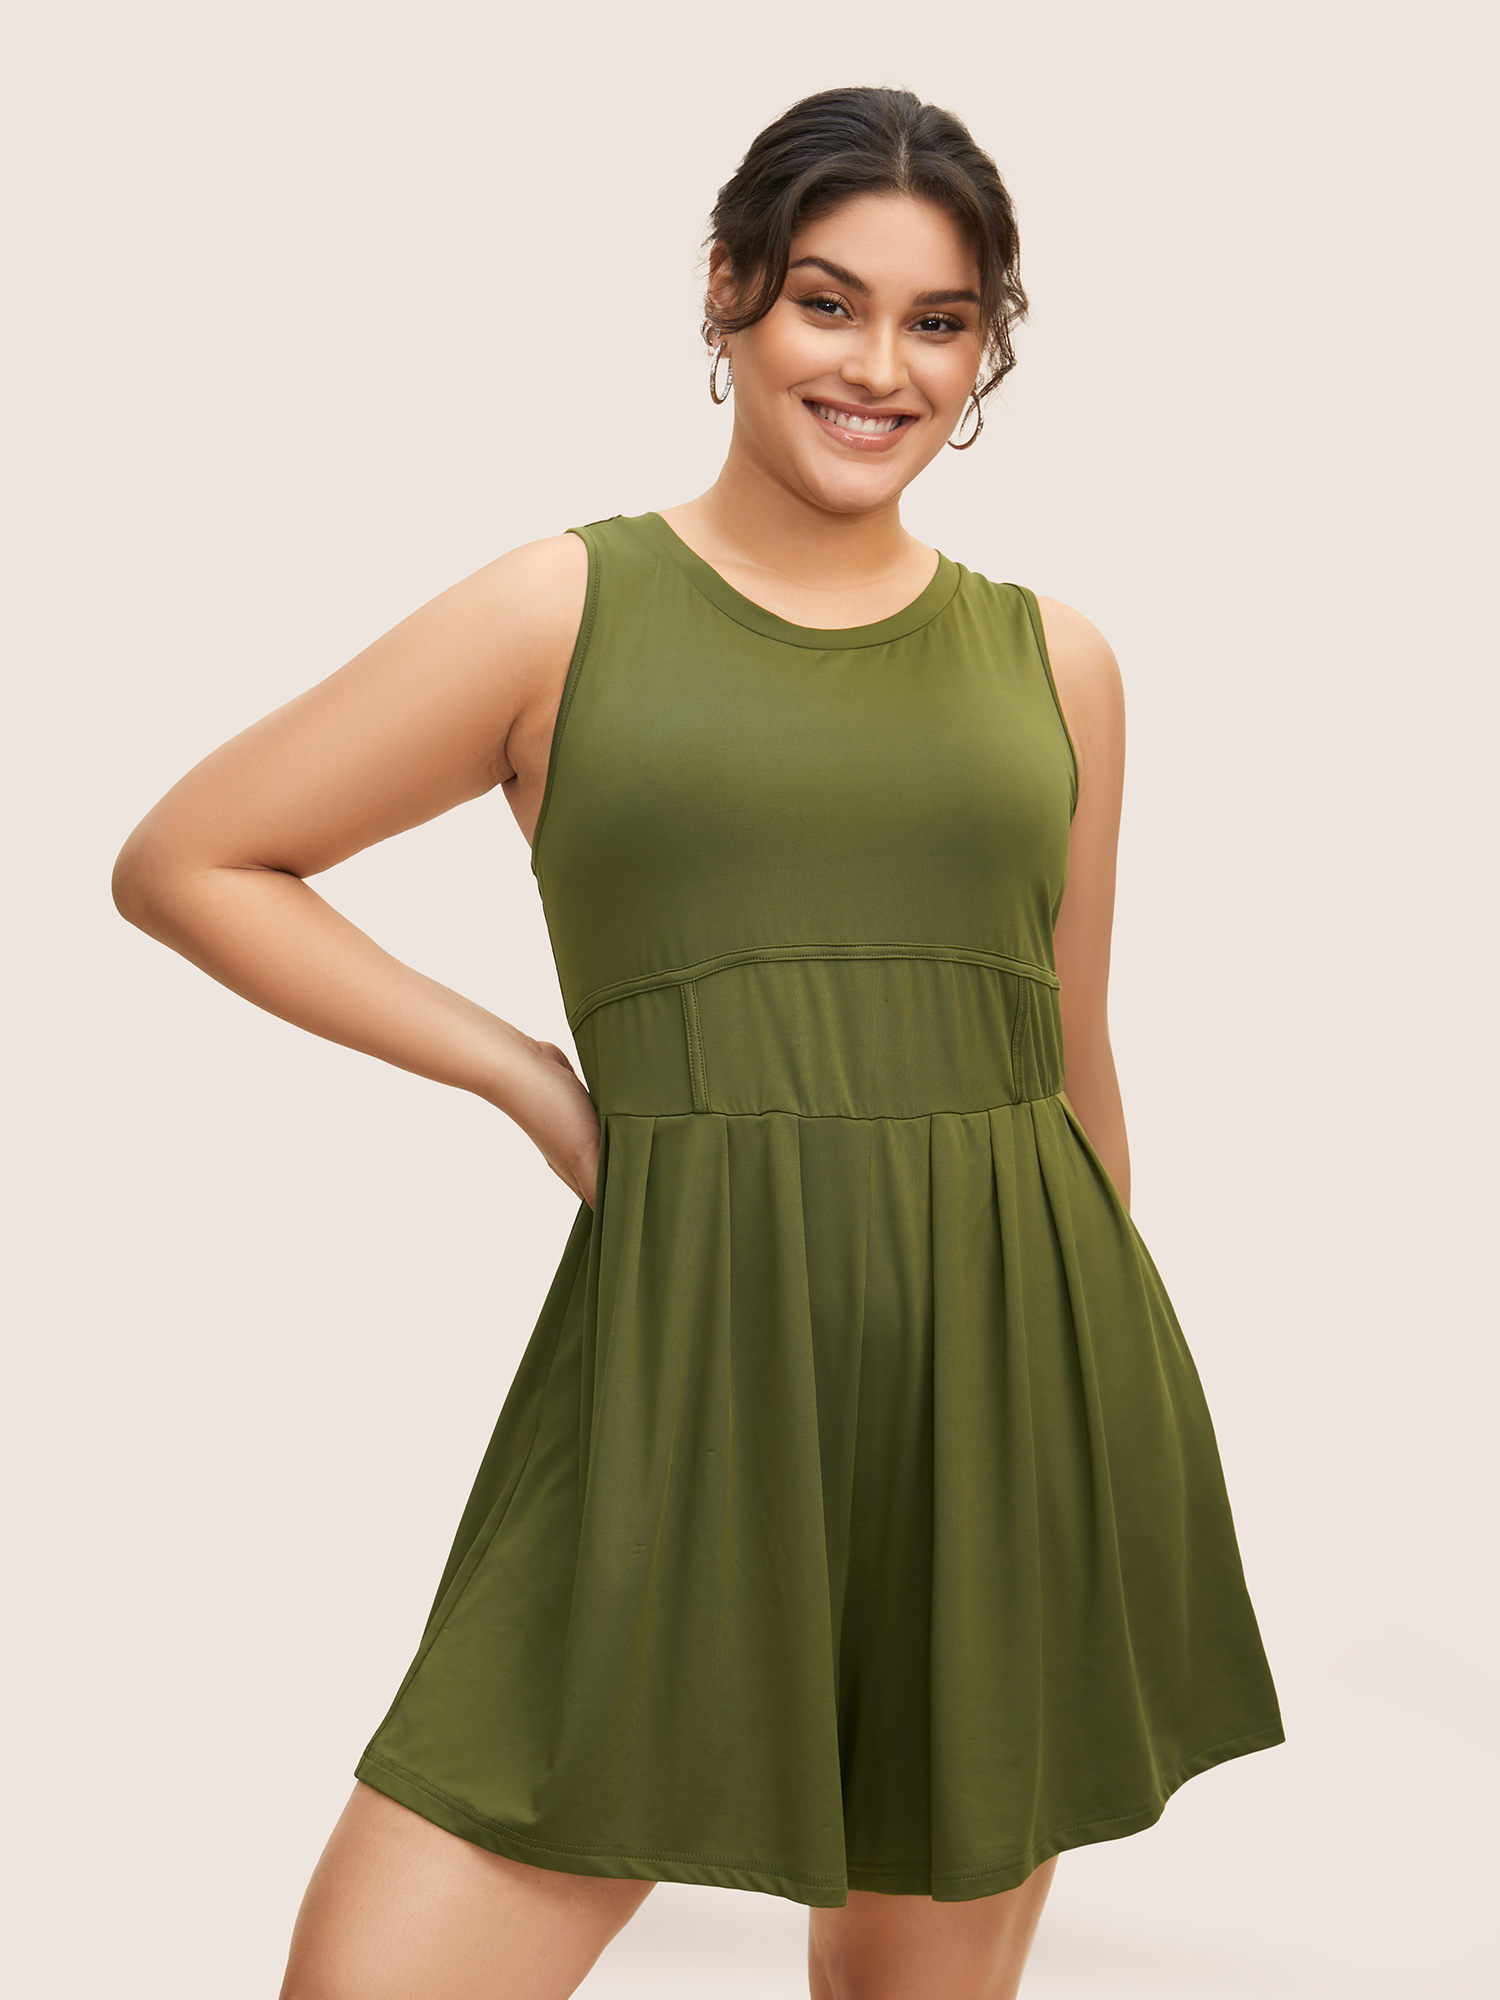 

Plus Size Plain Round Neck Cinching Waist Romper ArmyGreen Side seam pocket Casual Everyday  Rompers Bloomchic